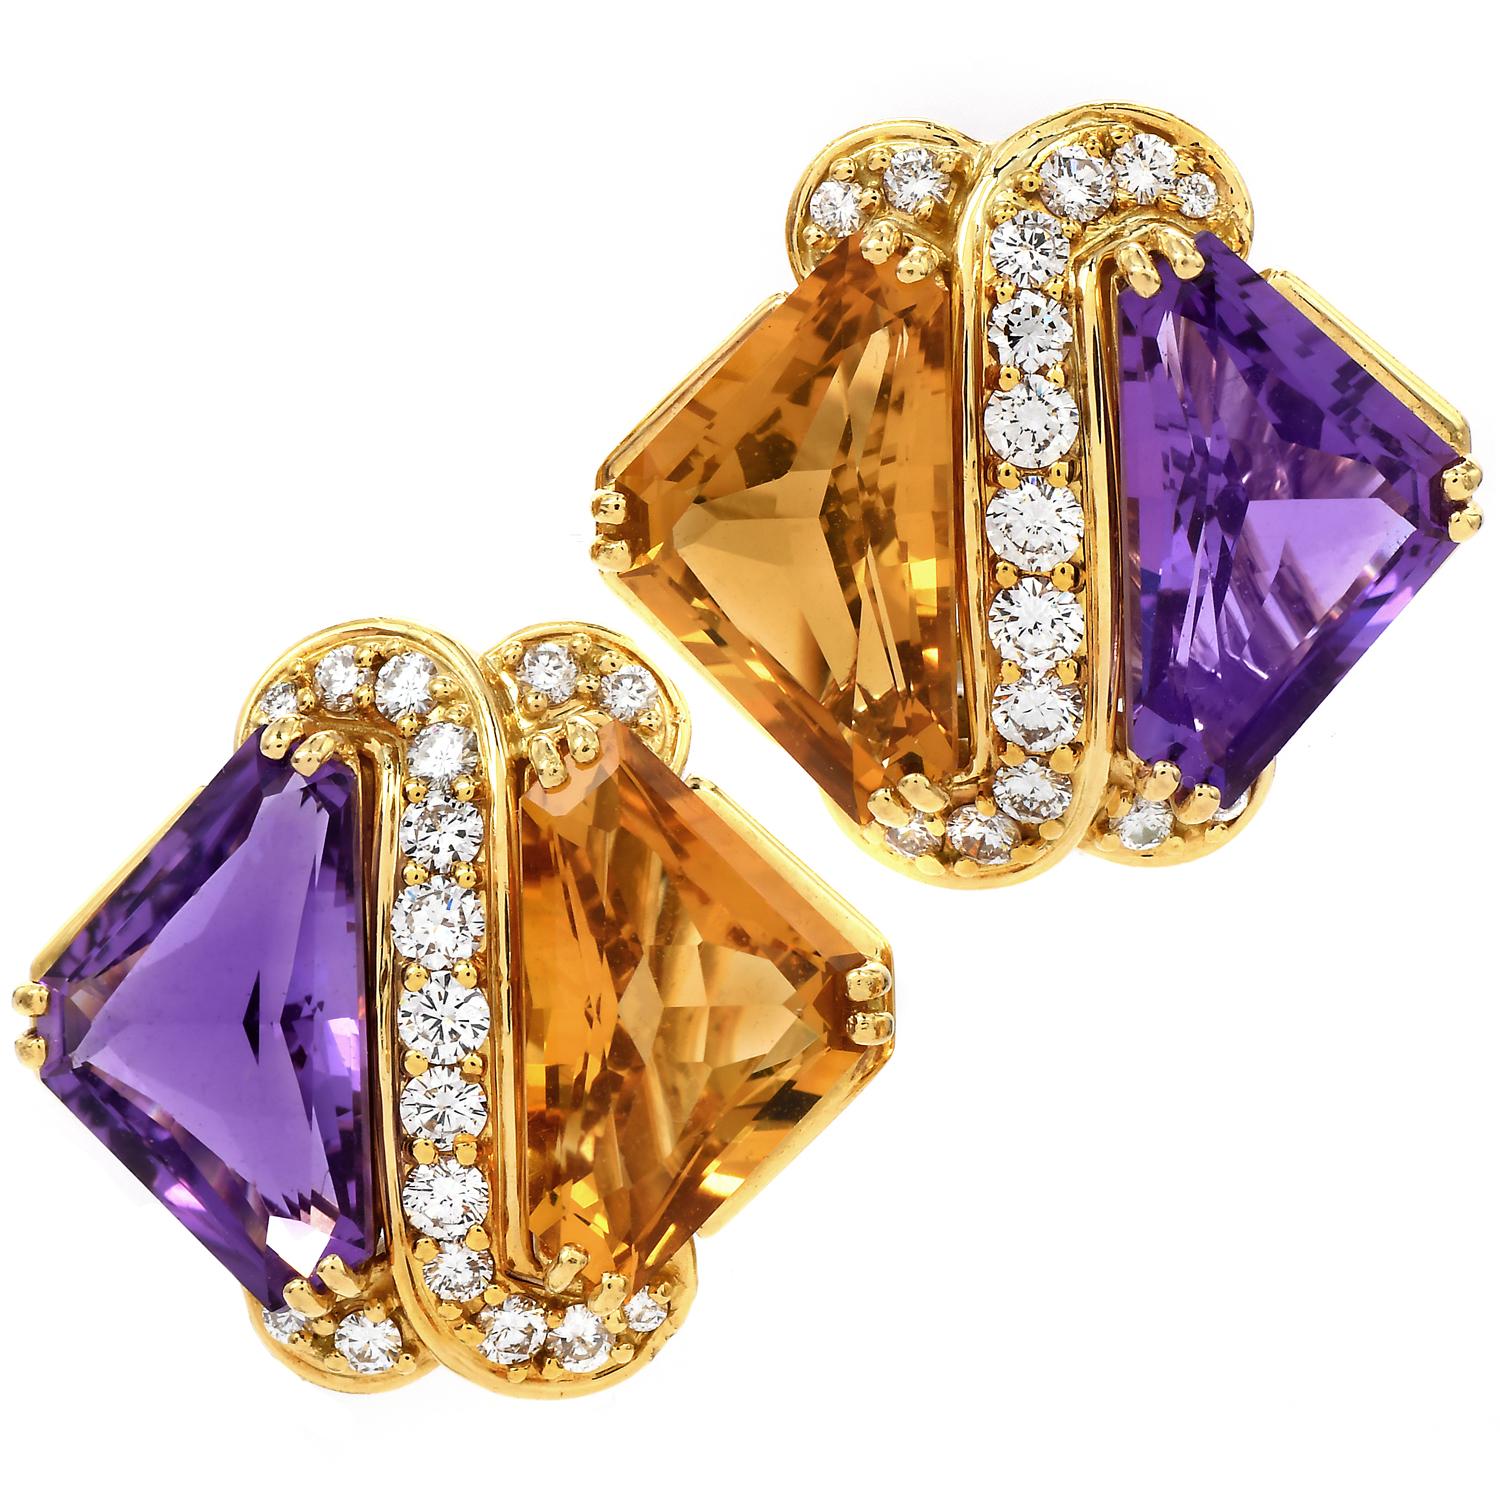 This Classy early 1980s- late mid Century earrings are made by famous American jewelry designer, Hammerman Brothers.

They are Crafted of 18K yellow gold, topped with pair of triangular cut deep purple amethyst and a pair of triangular deep golden